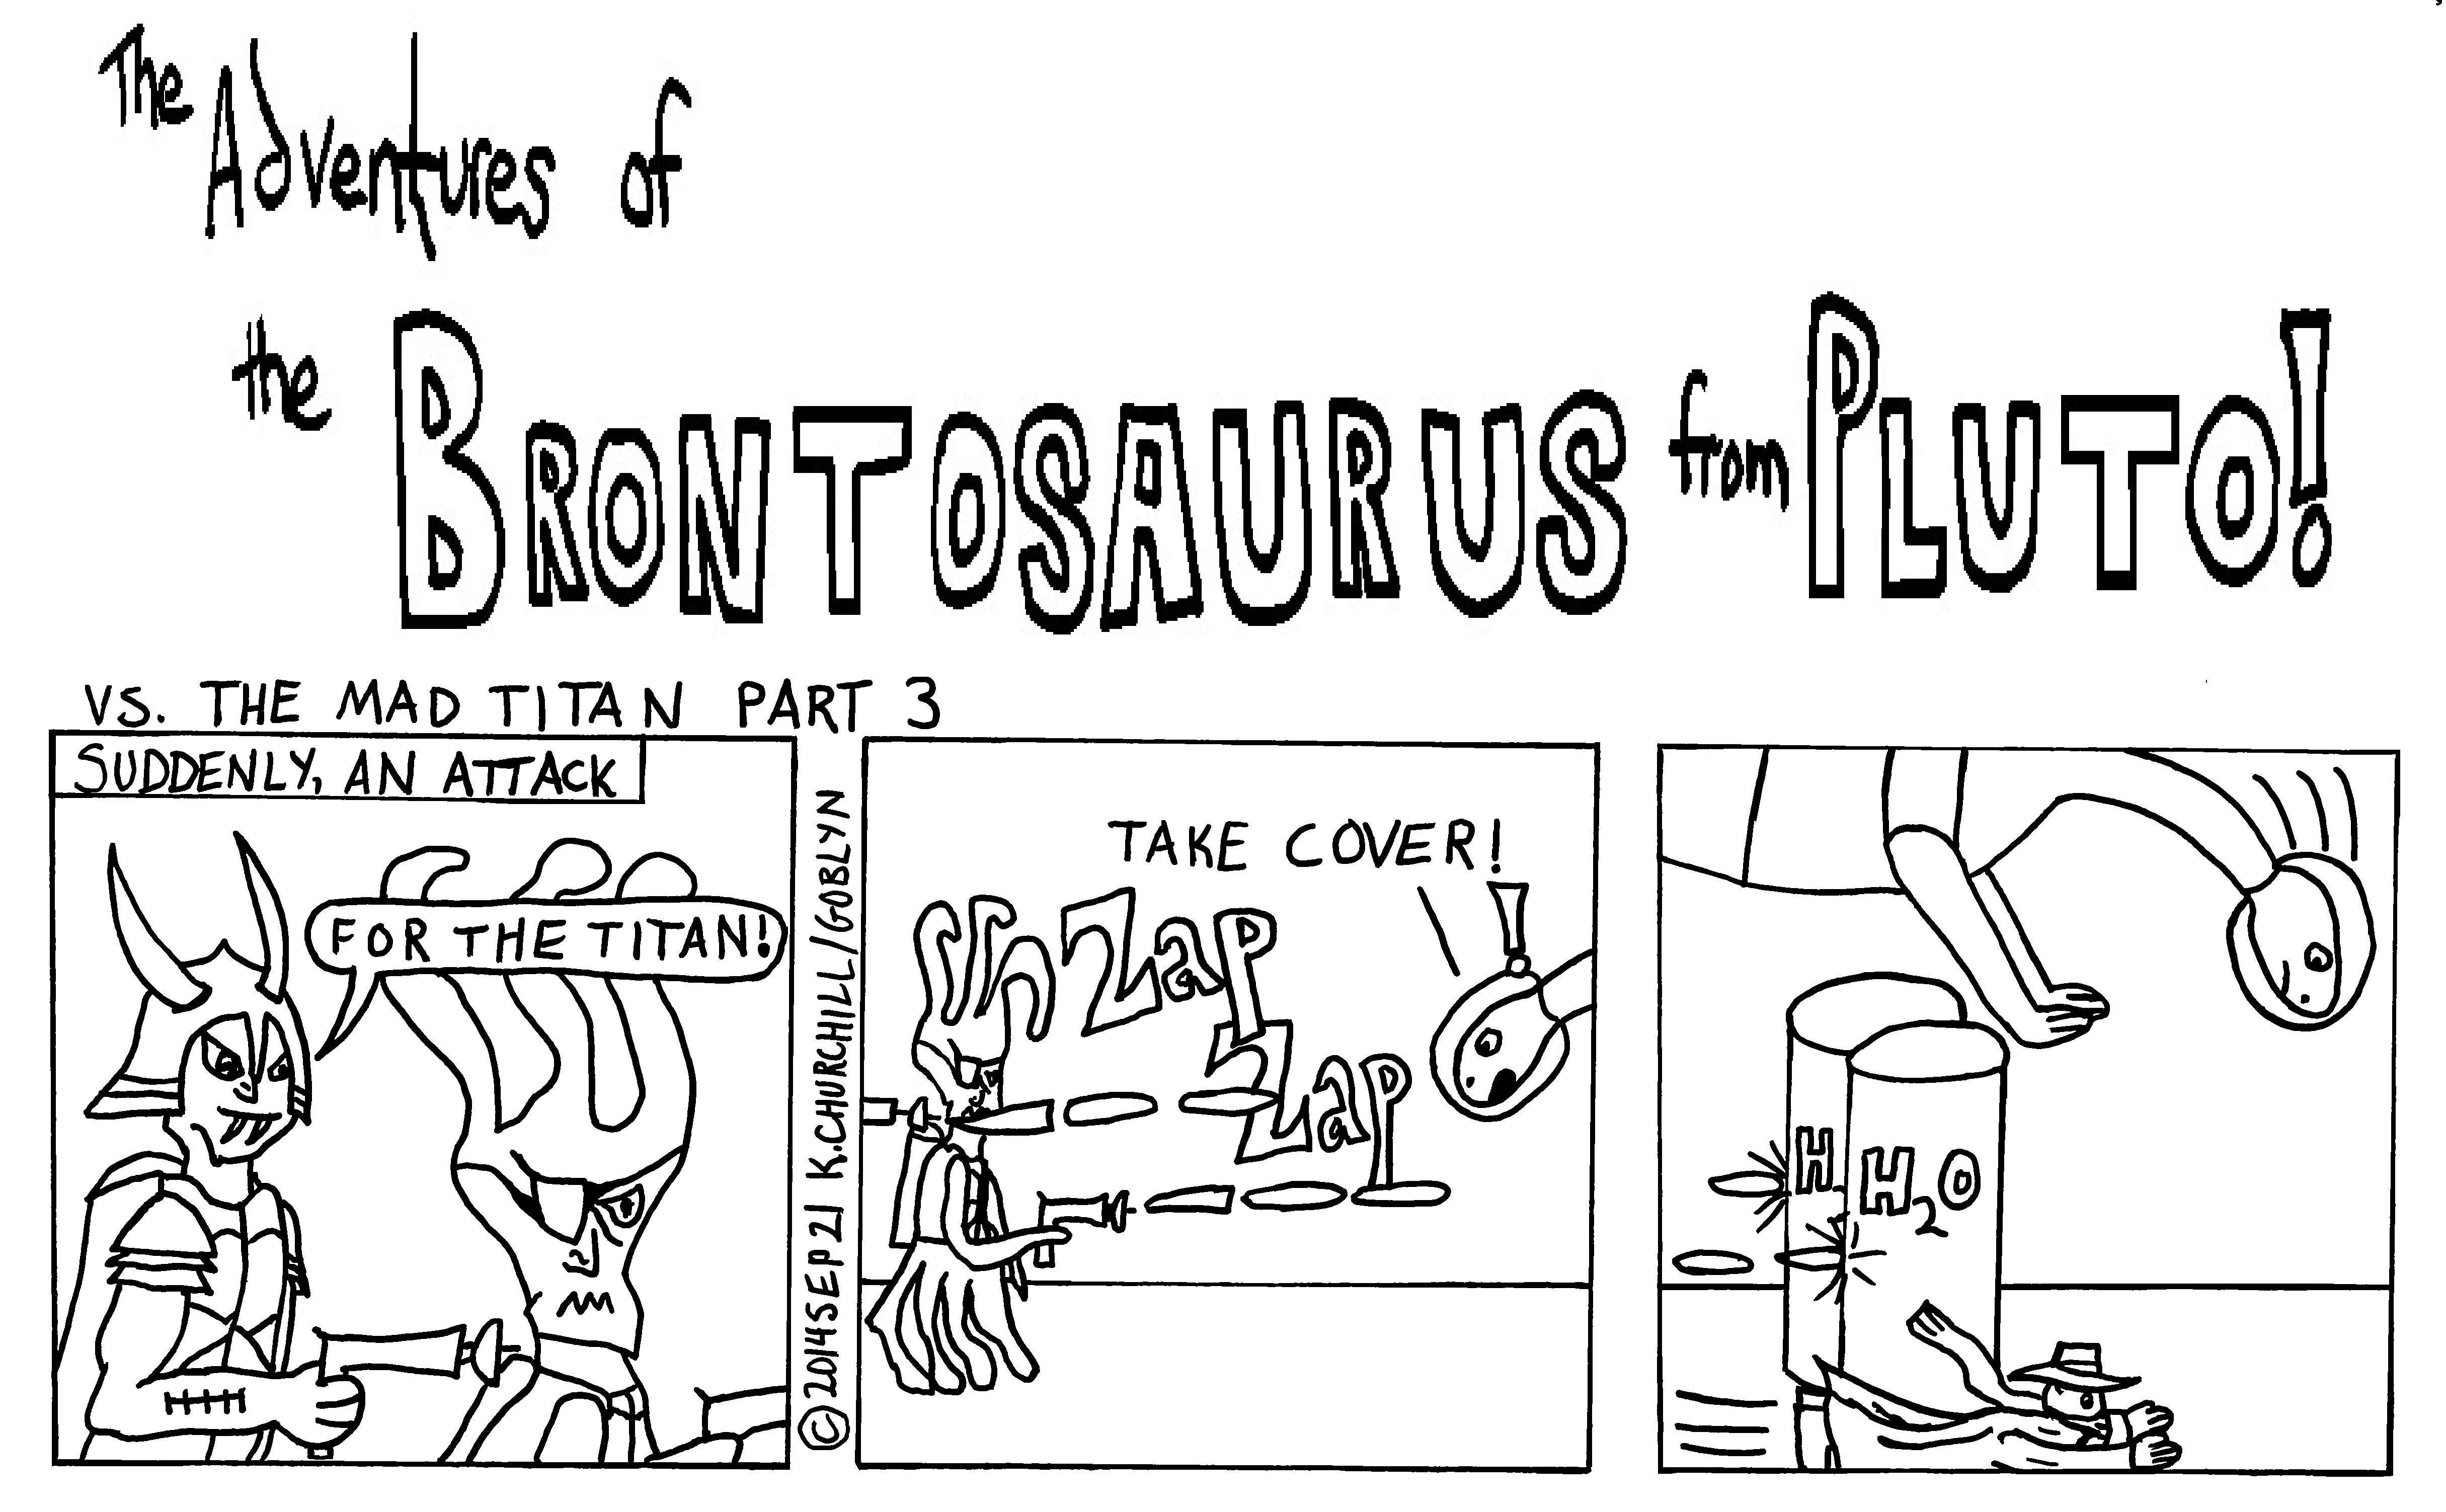 The Brontosaurus from Pluto is attacked by Space Pirates!